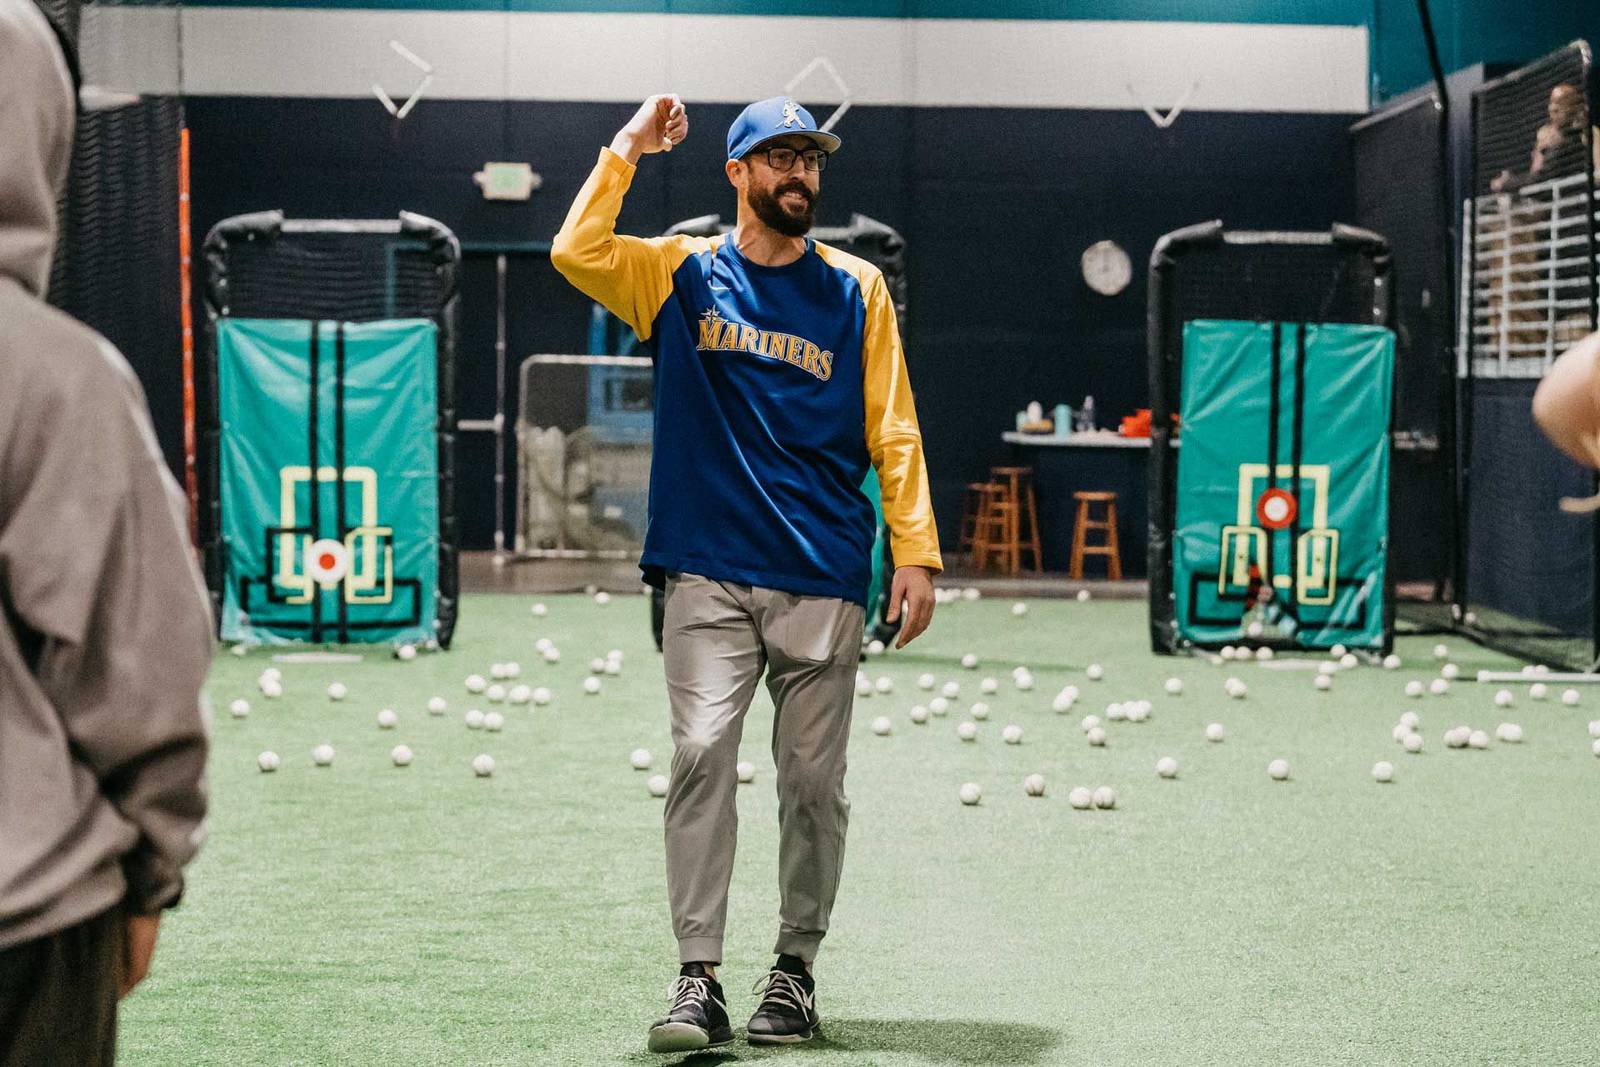 Seattle Mariners launch new training centers to promote equitable youth